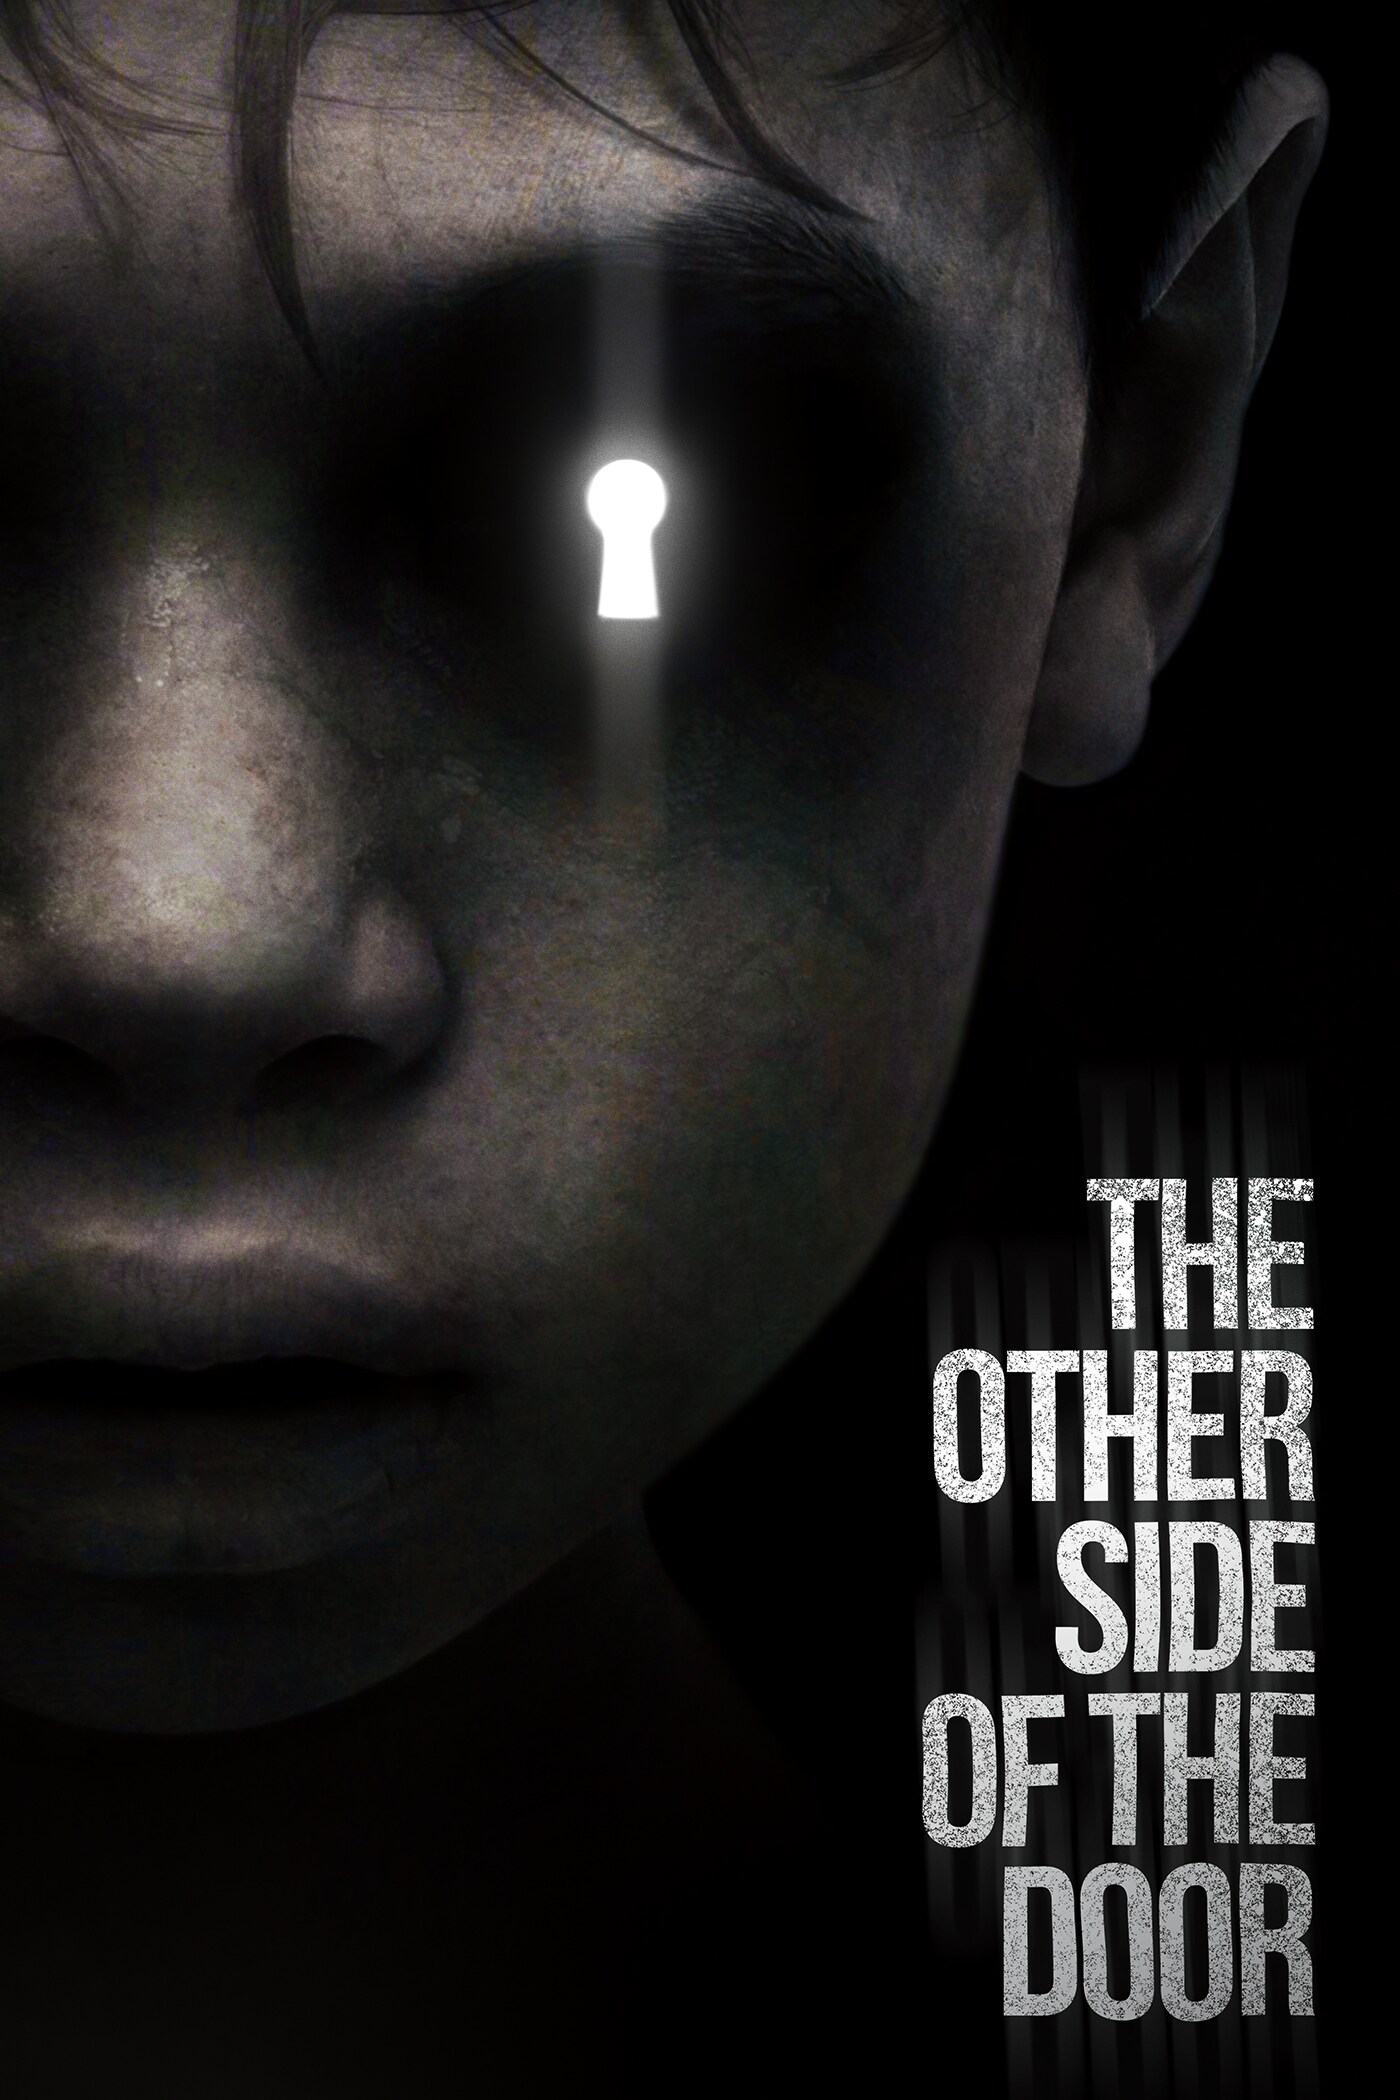 The Other Side of the Door movie poster